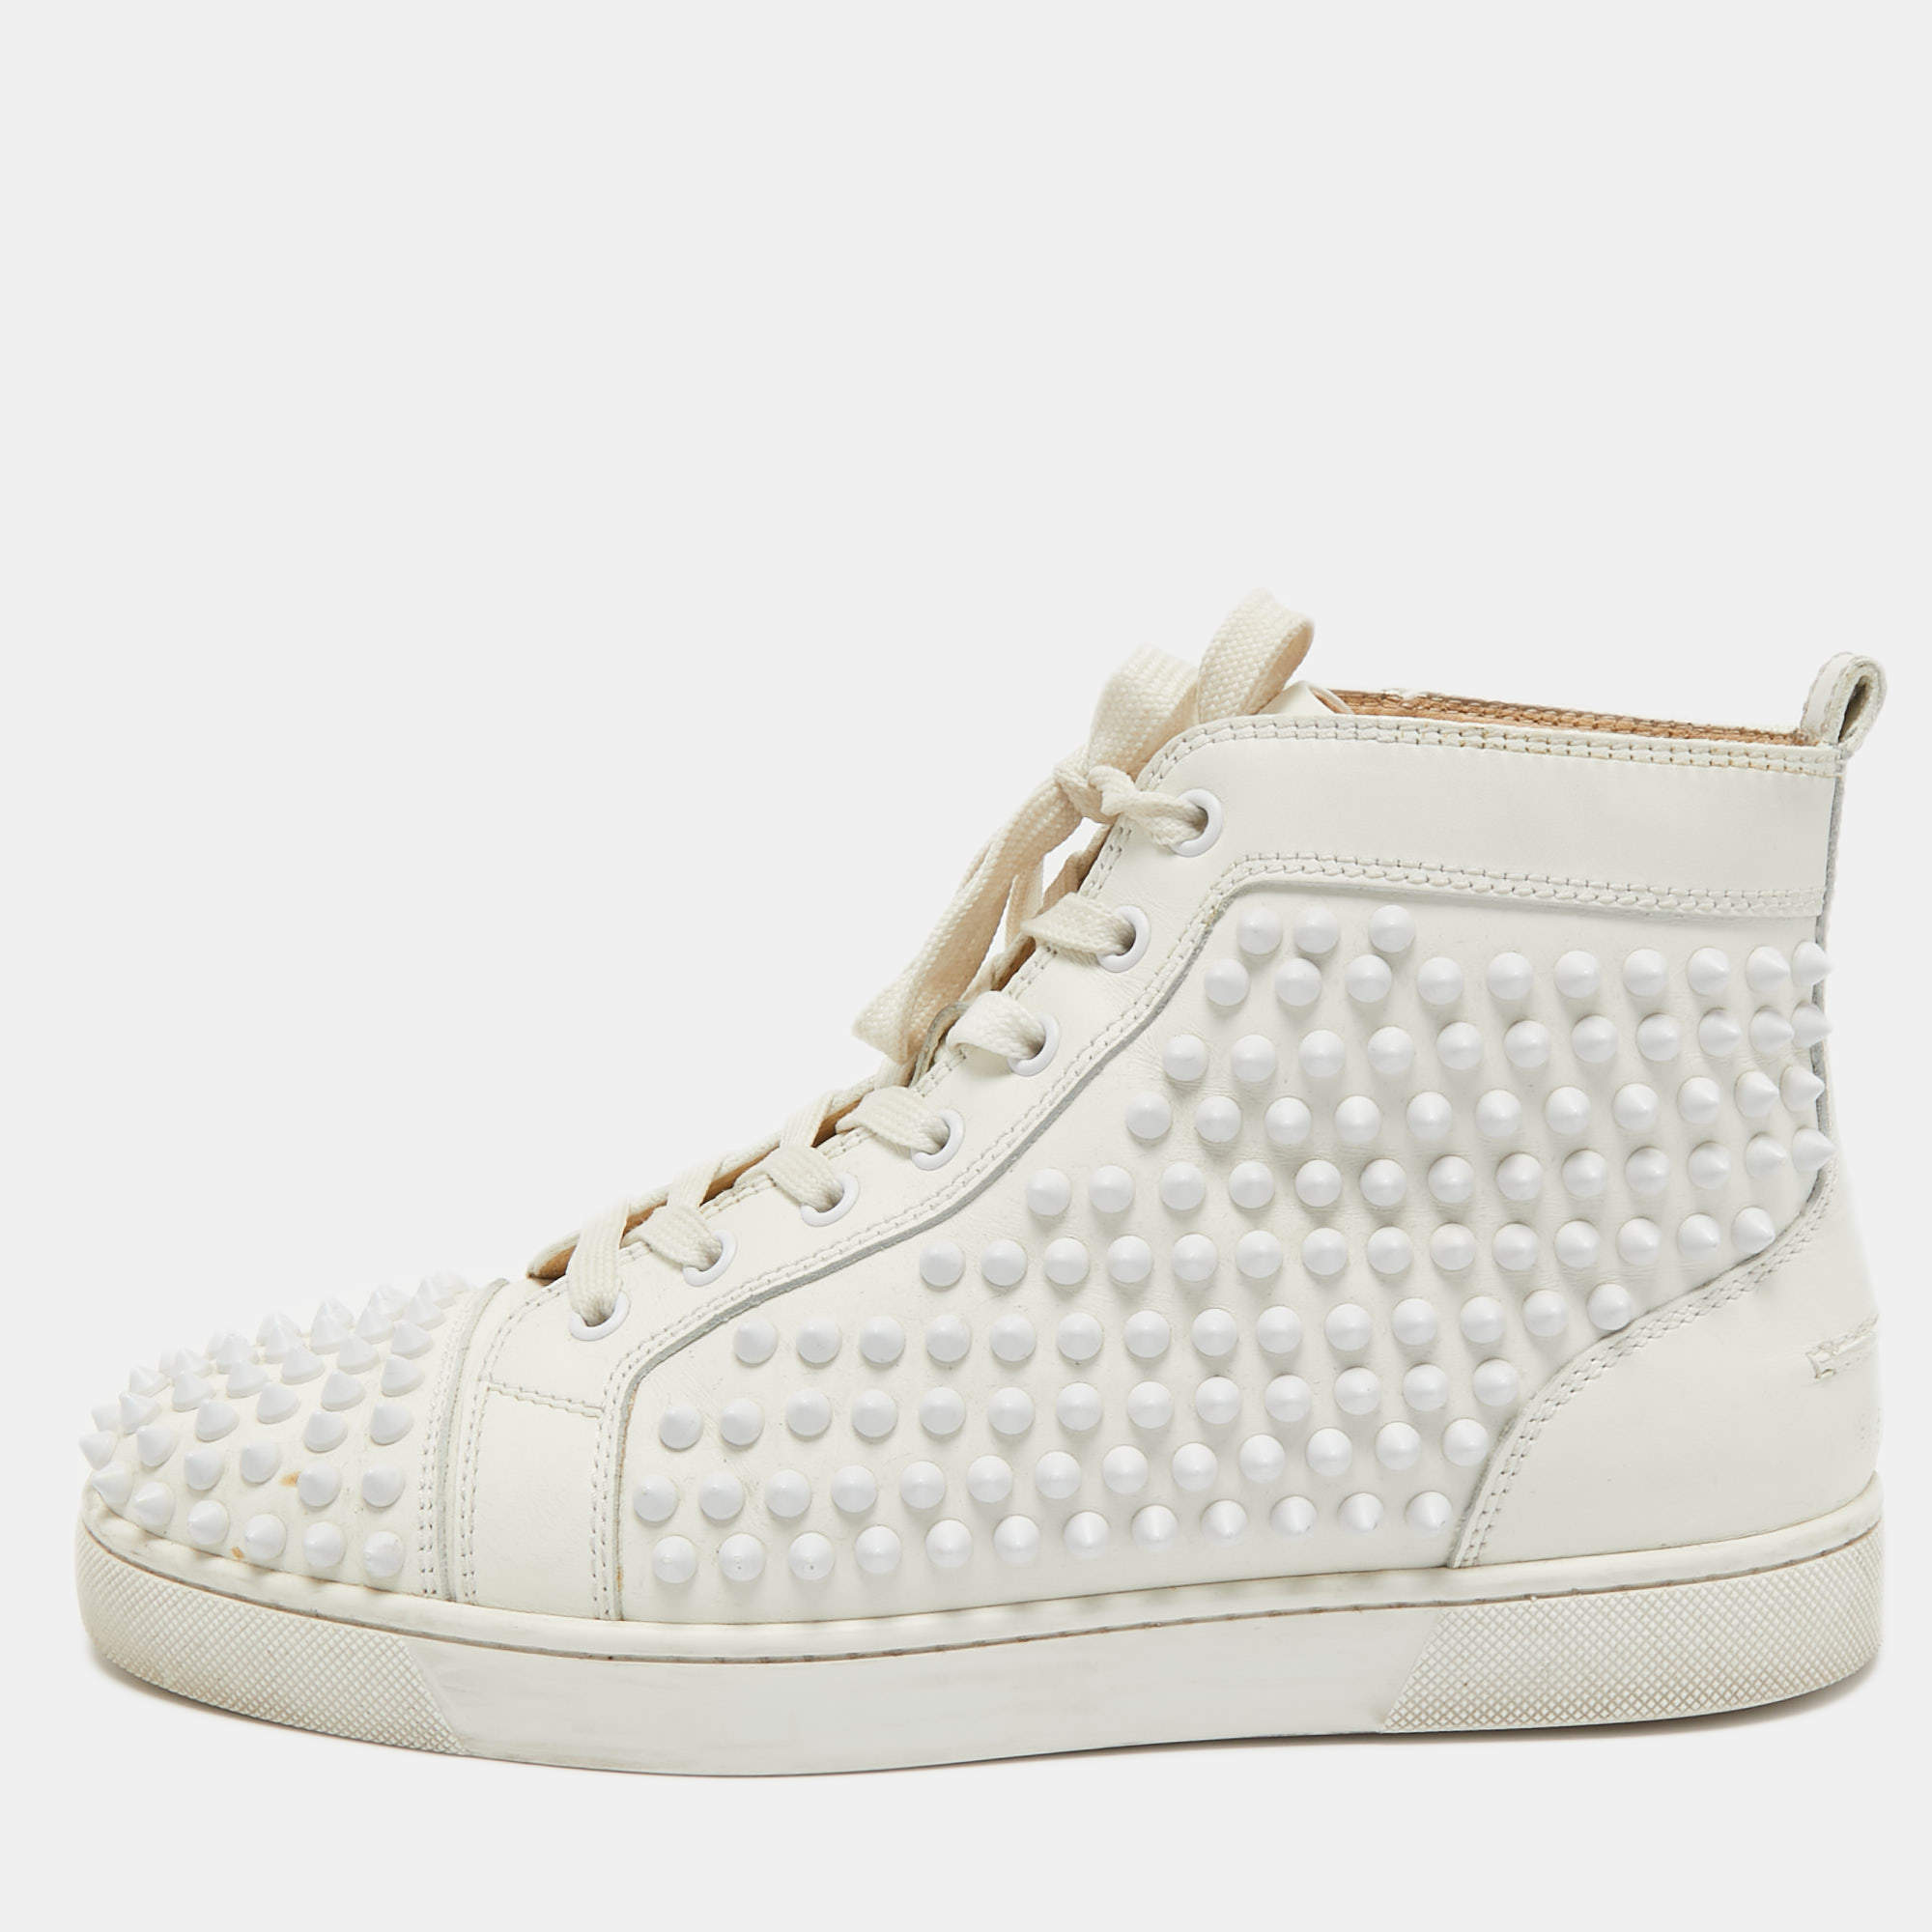 temperament øve sig Helligdom Christian Louboutin White Leather Louis Spikes High Top Sneakers Size 39.5  Christian Louboutin | TLC